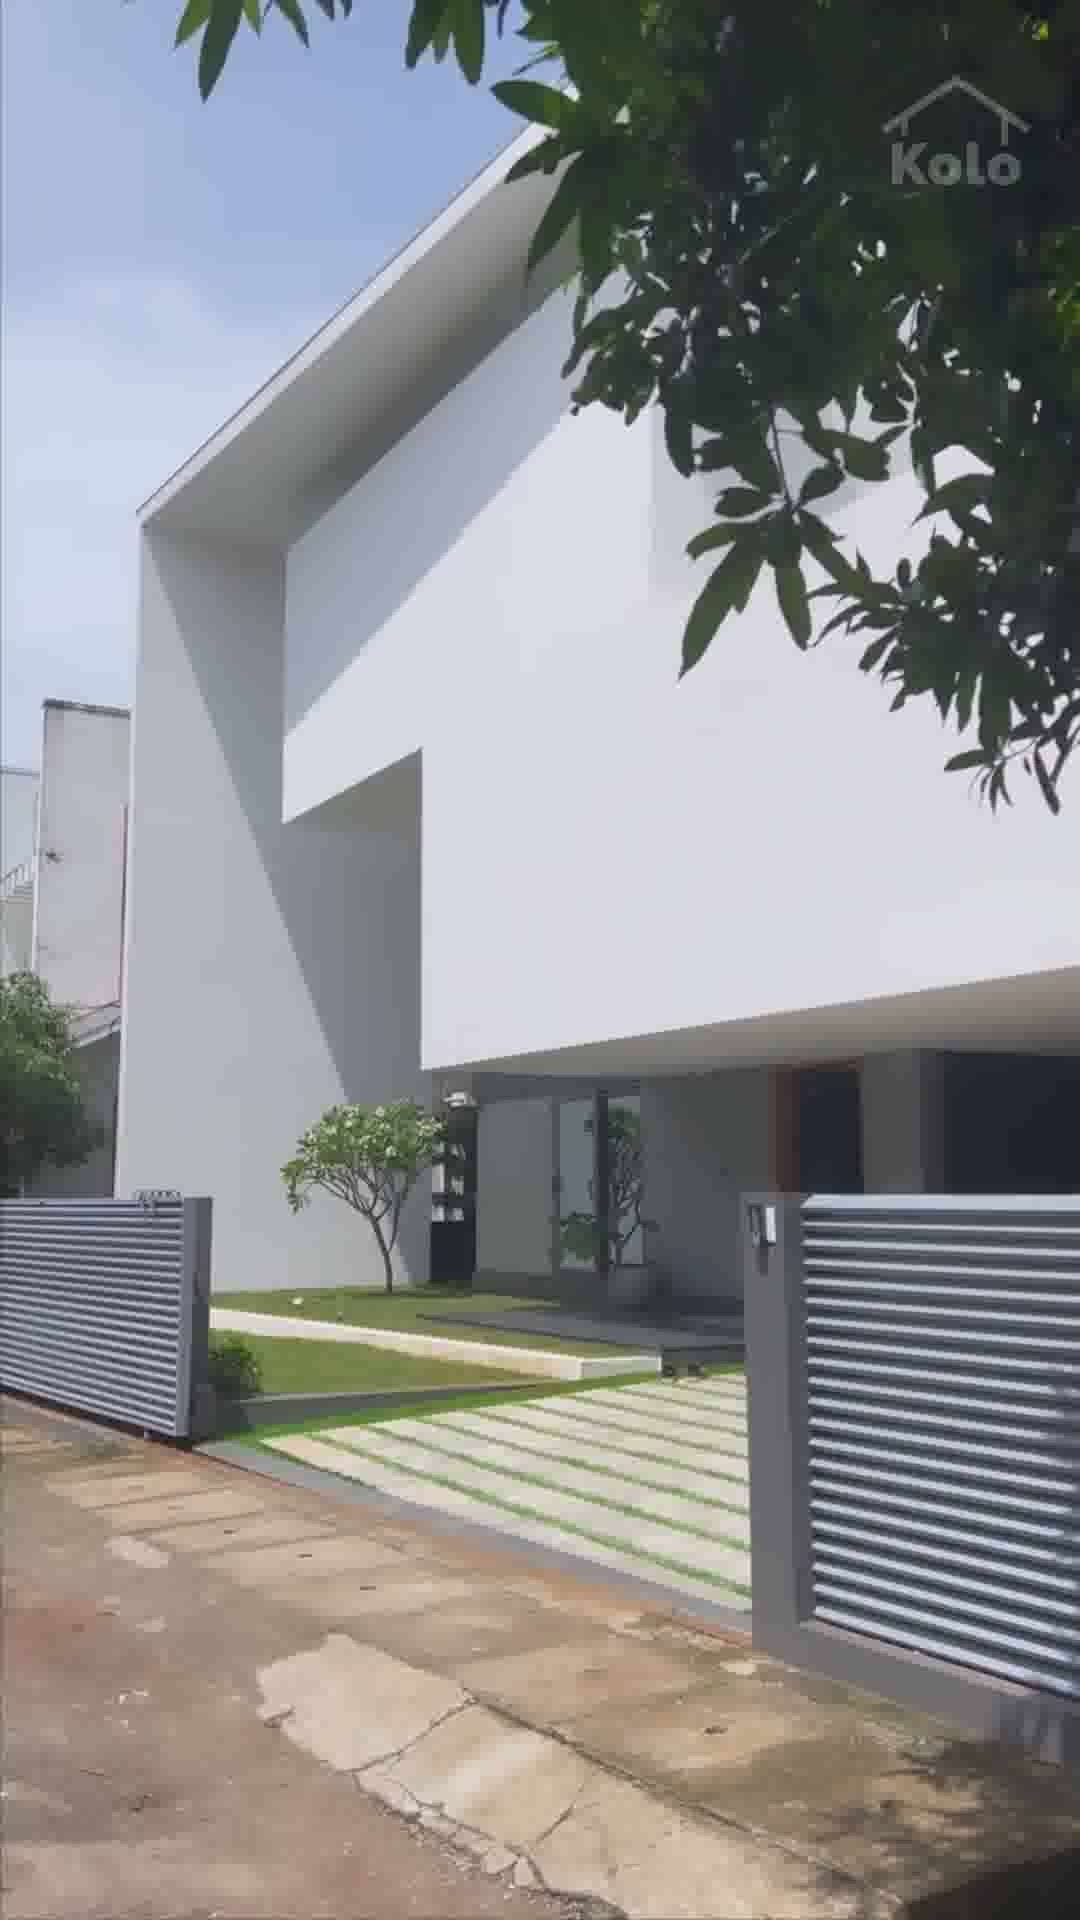 Residence | Elamakkara, Kochi

Credits: Ar. Asif Ahmed
@architect_asif_ahmed

#kerala #futuristicarchitecture #koloapp #homedesign #architecturephotography #tropical #green #landscape #outdoor #gardens #homely #kerala #minimalistic #cleanlines #keralaarchitecture #interiors #sustainableliving #interiordesign #modernarchitecture #incredibleIndia  #architectureloverspics #archidaily #modernhouses #modernhouse #contemporaryhome #luxuryhomes